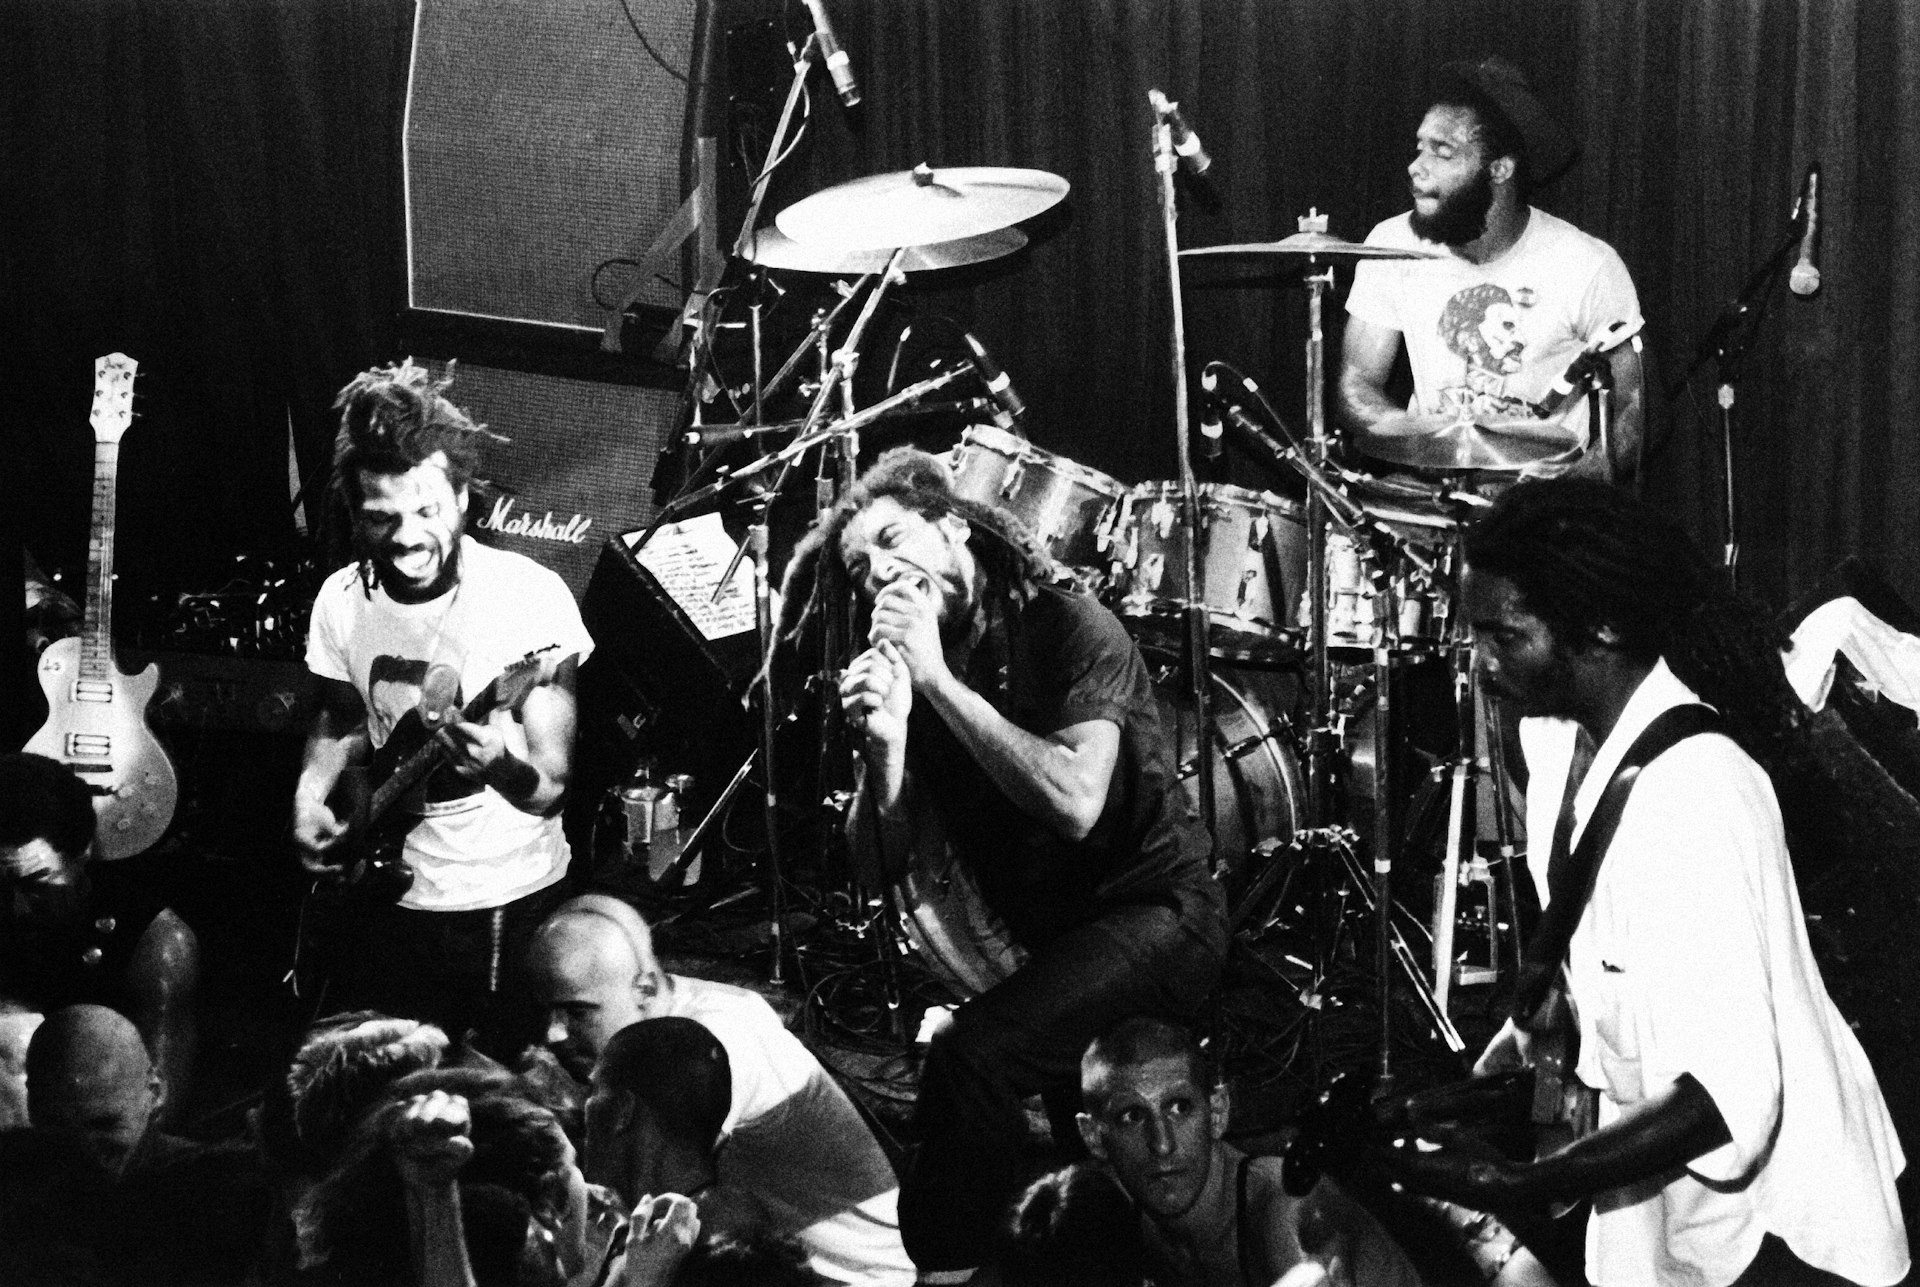 Are Bad Brains the best hardcore band of all time?